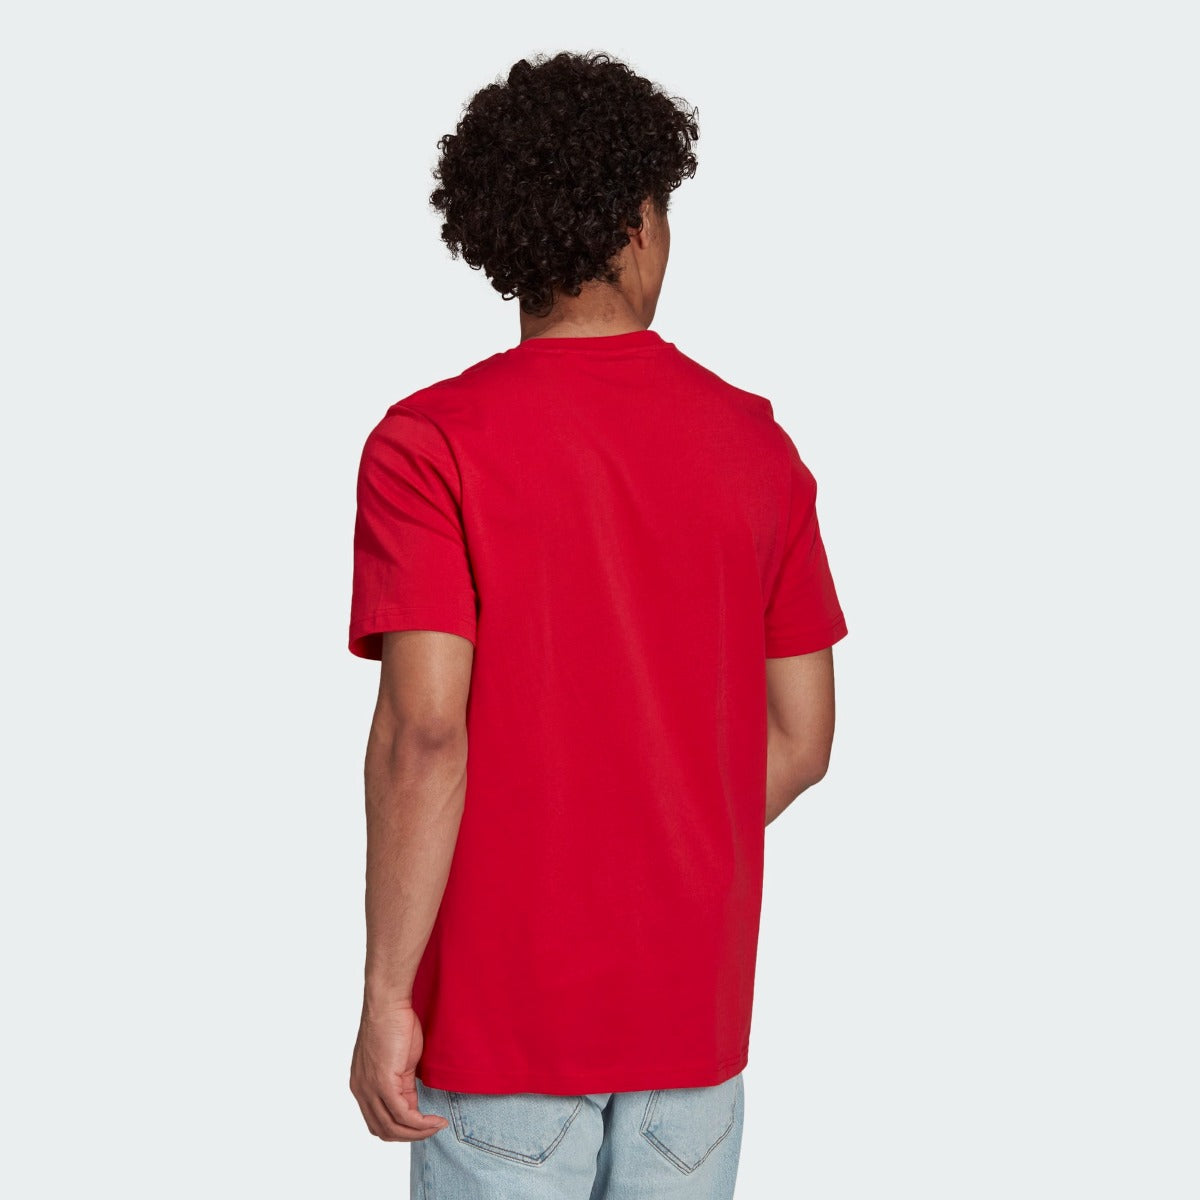 Adidas 2021-22 Manchester United Street Tee - Red (Model - Back)